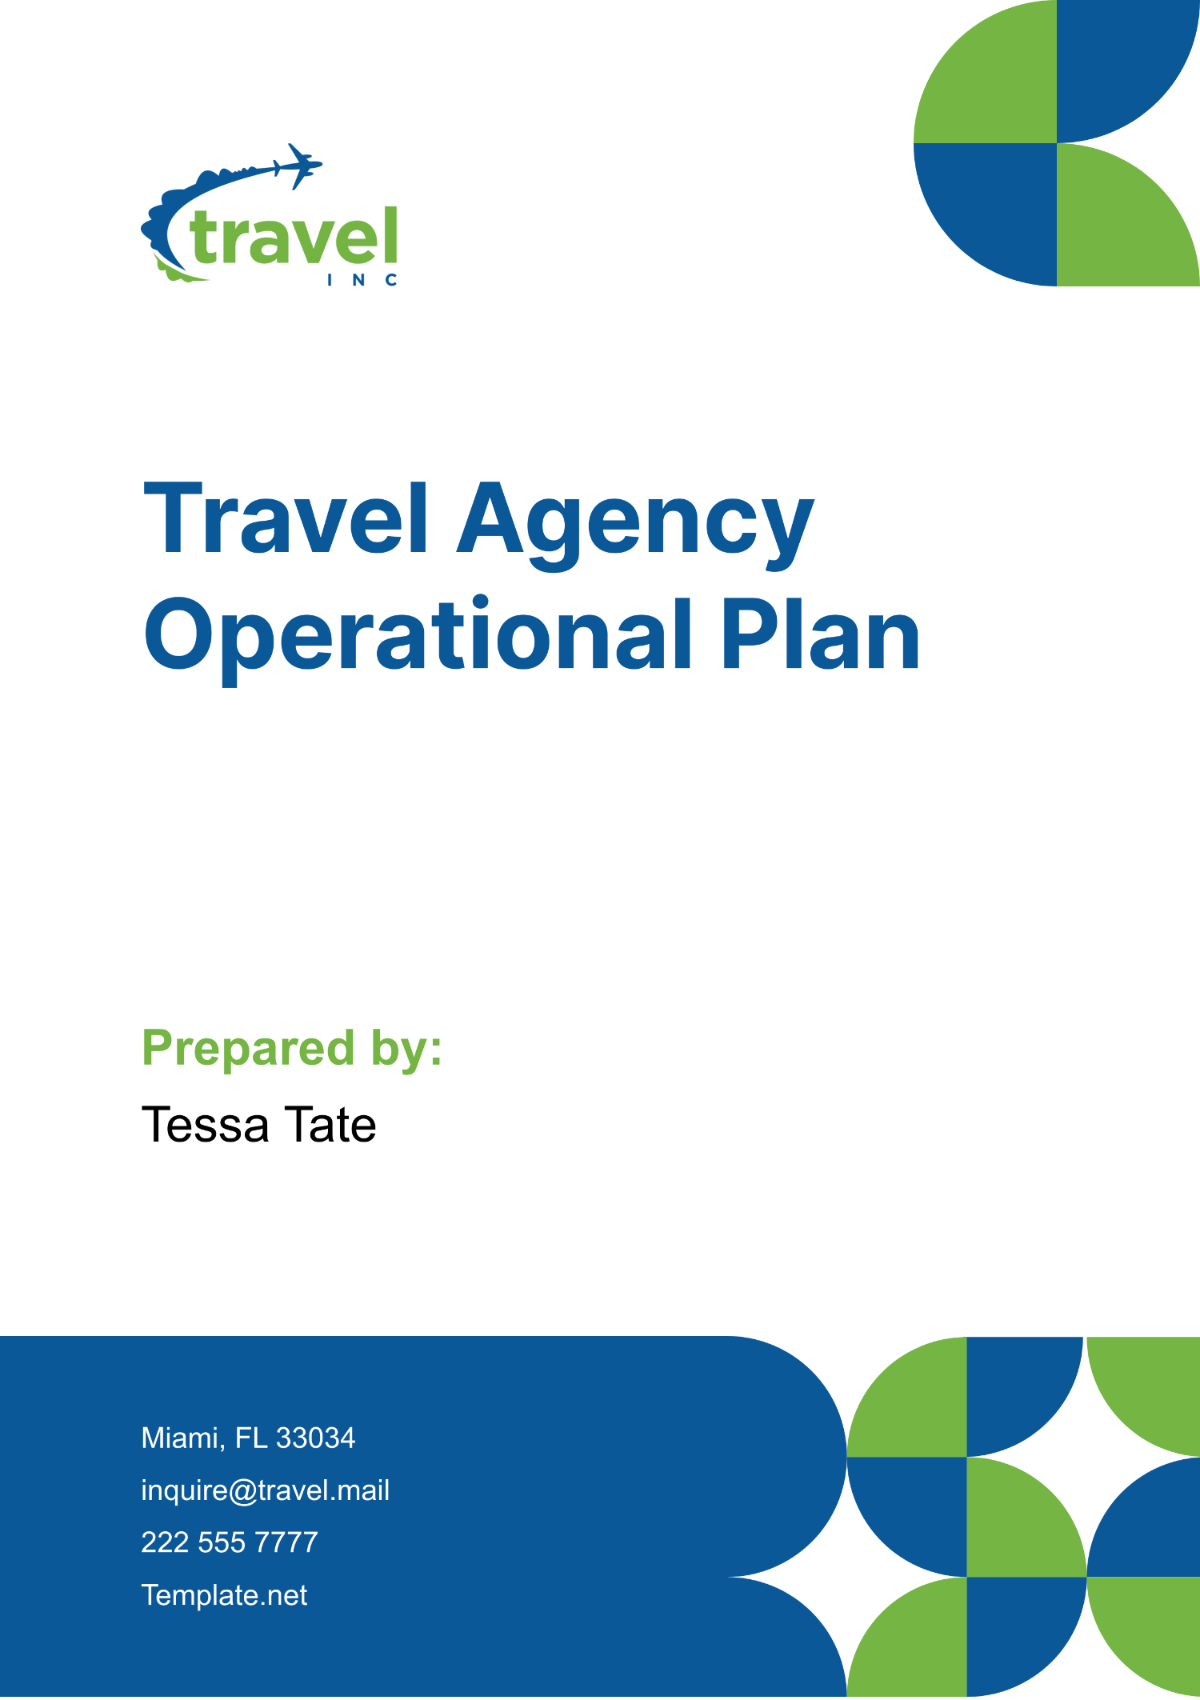 Travel Agency Operational Plan Template